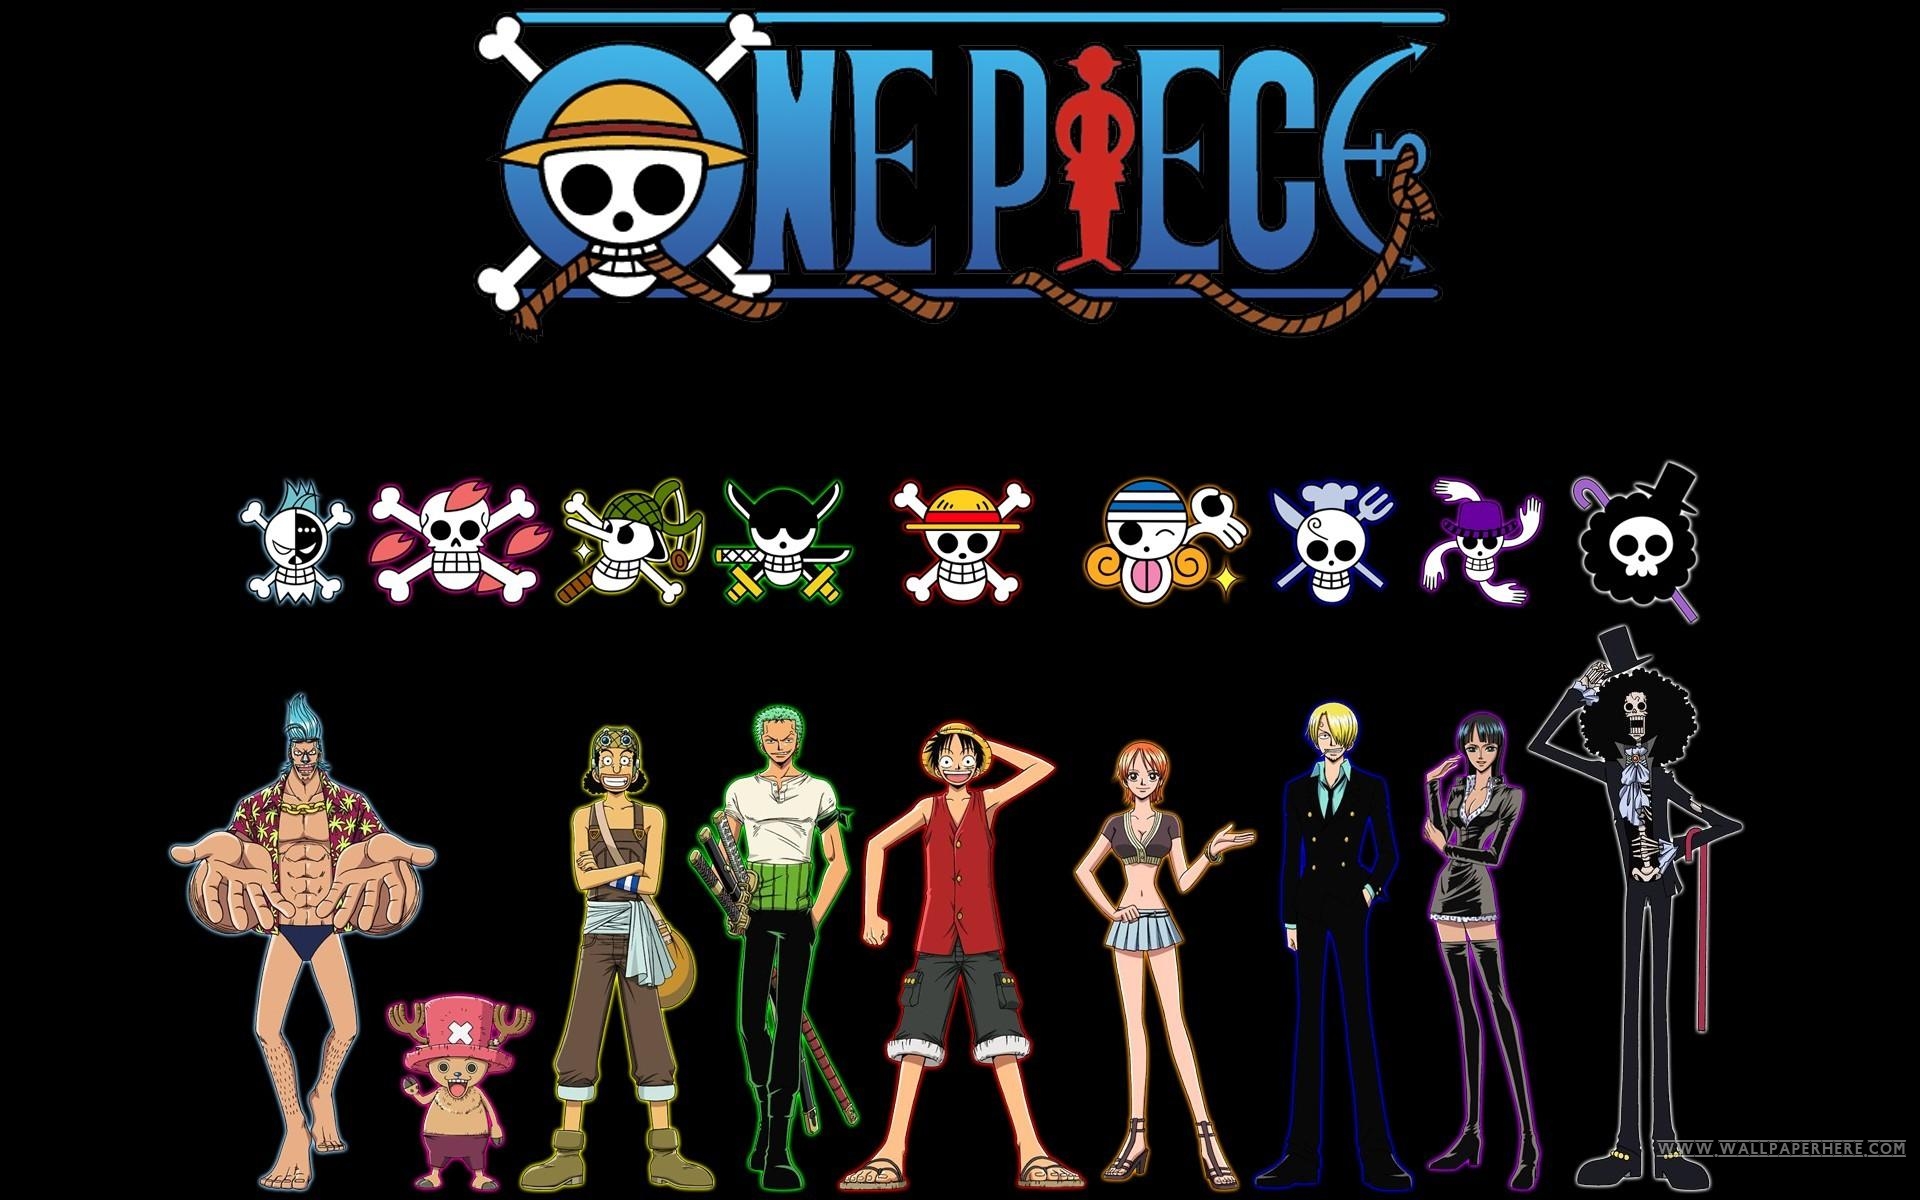 10 Gorgeous One Piece Anime HD Wallpapers   Design Hey Design Hey 1920x1200